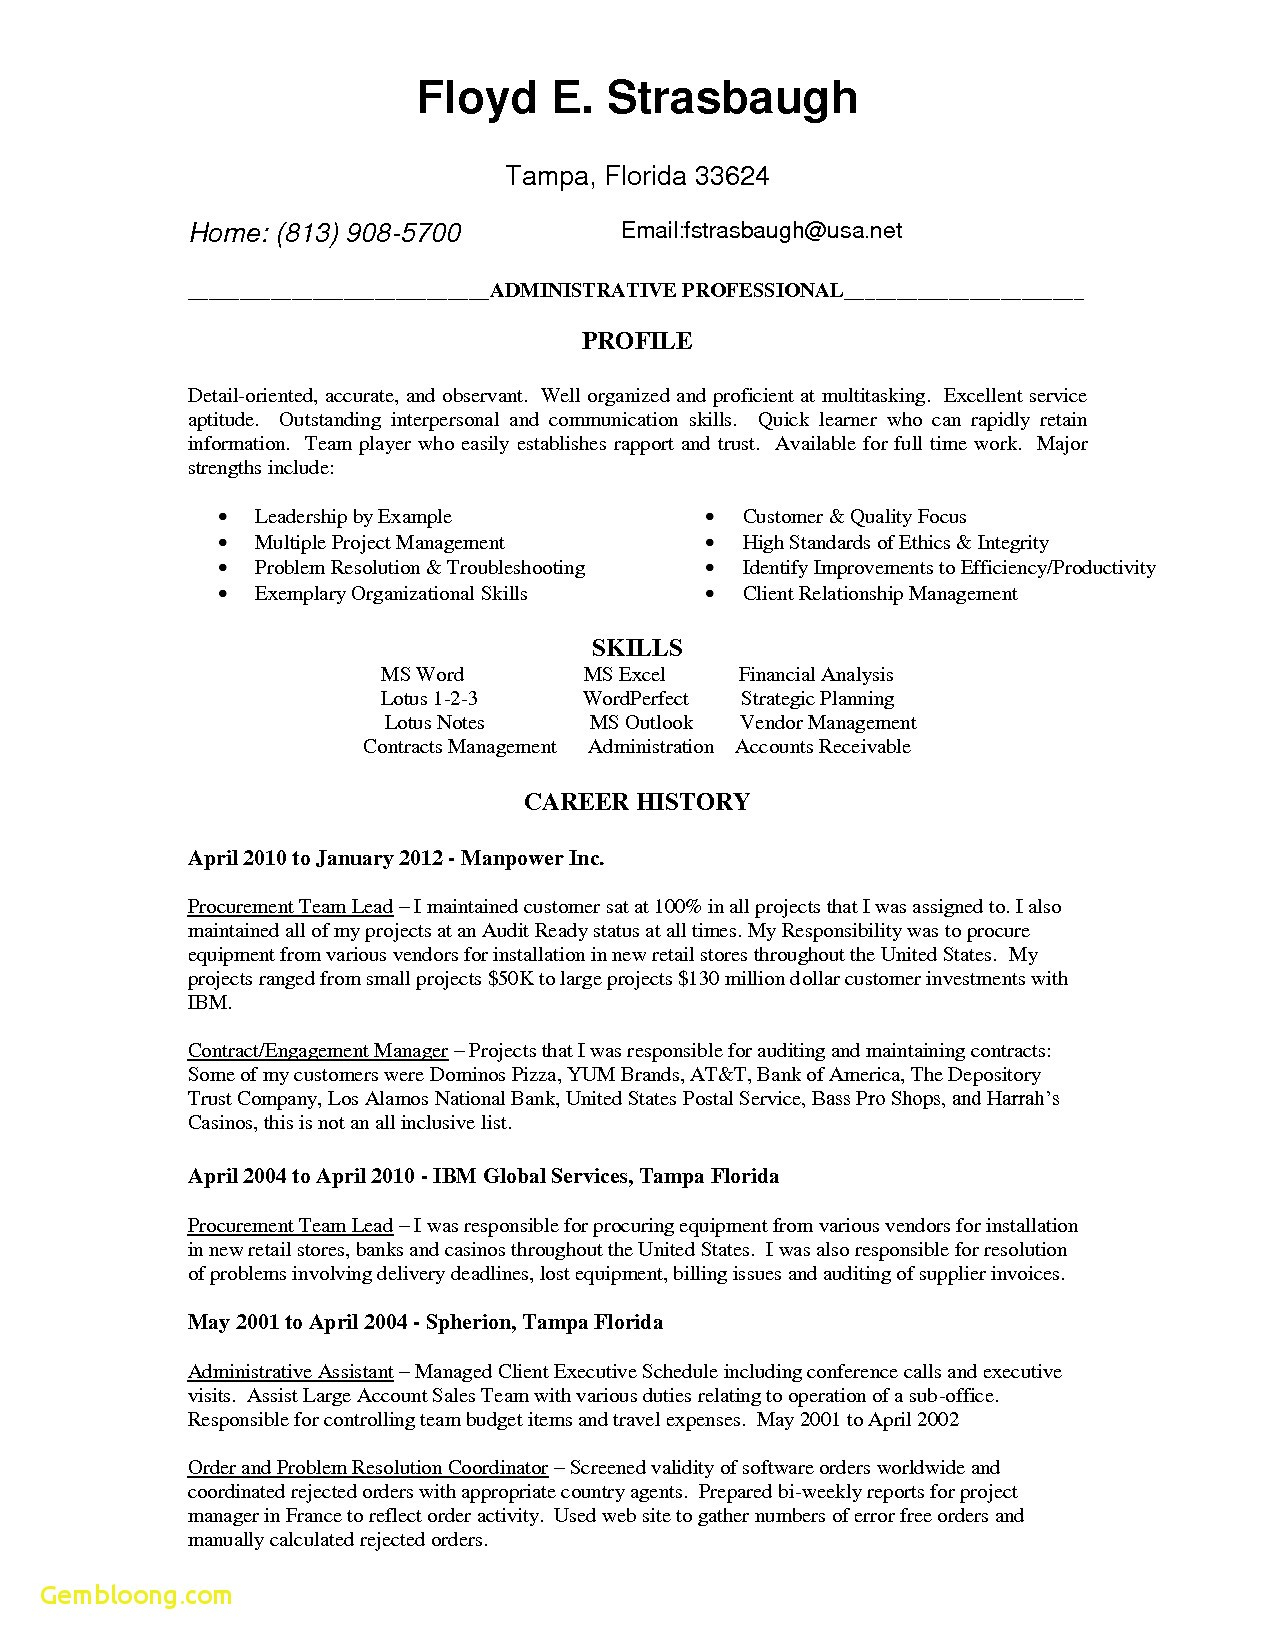 Creative Cover Letter Template Free Download - Resume and Cover Letter Template Beautiful Professional Resume